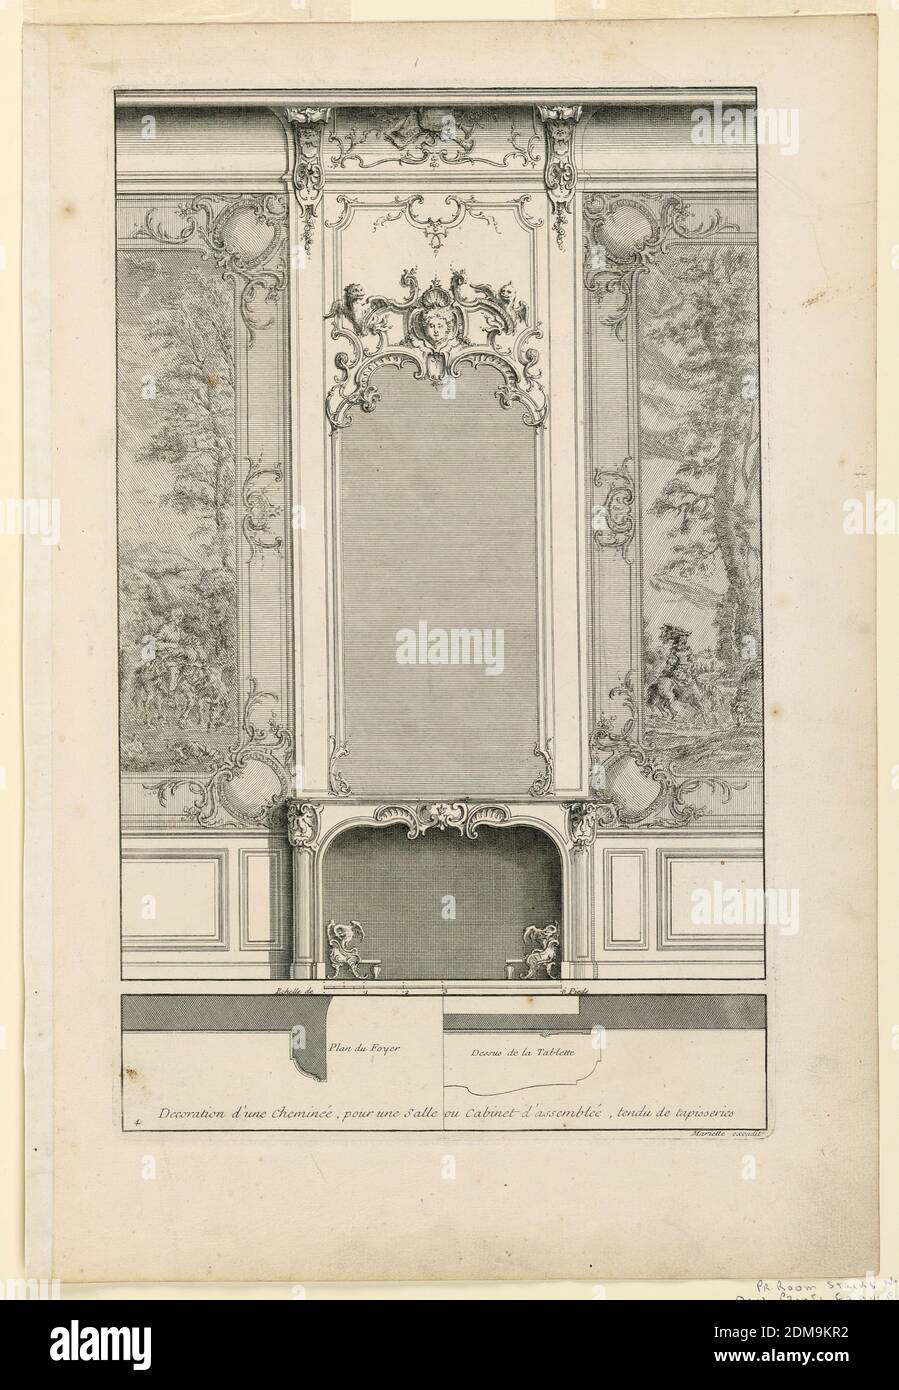 Plate 4, Decoration de Cheminée pour un grand Apartement, Jacques-François Blondel, French, 1705 - 1774, Jean Mariette, 1660–1742, Engraving on paper, A mantelpiece, slightly projecting with a mirror above. Upper part of frame embellished with scrollwork, female mask and two birds. Tapestries decorating adjoining paneling. Below, profile of wall molding with legend. Inscribed along lower margin: 'Decoration d'une Cheminée, pour une Salle ou Cabinet d'assemblée, tendu de tapisseries'; lower right: 'Mariette excudit'; upper left: 4'., France, ca. 1727, Print Stock Photo